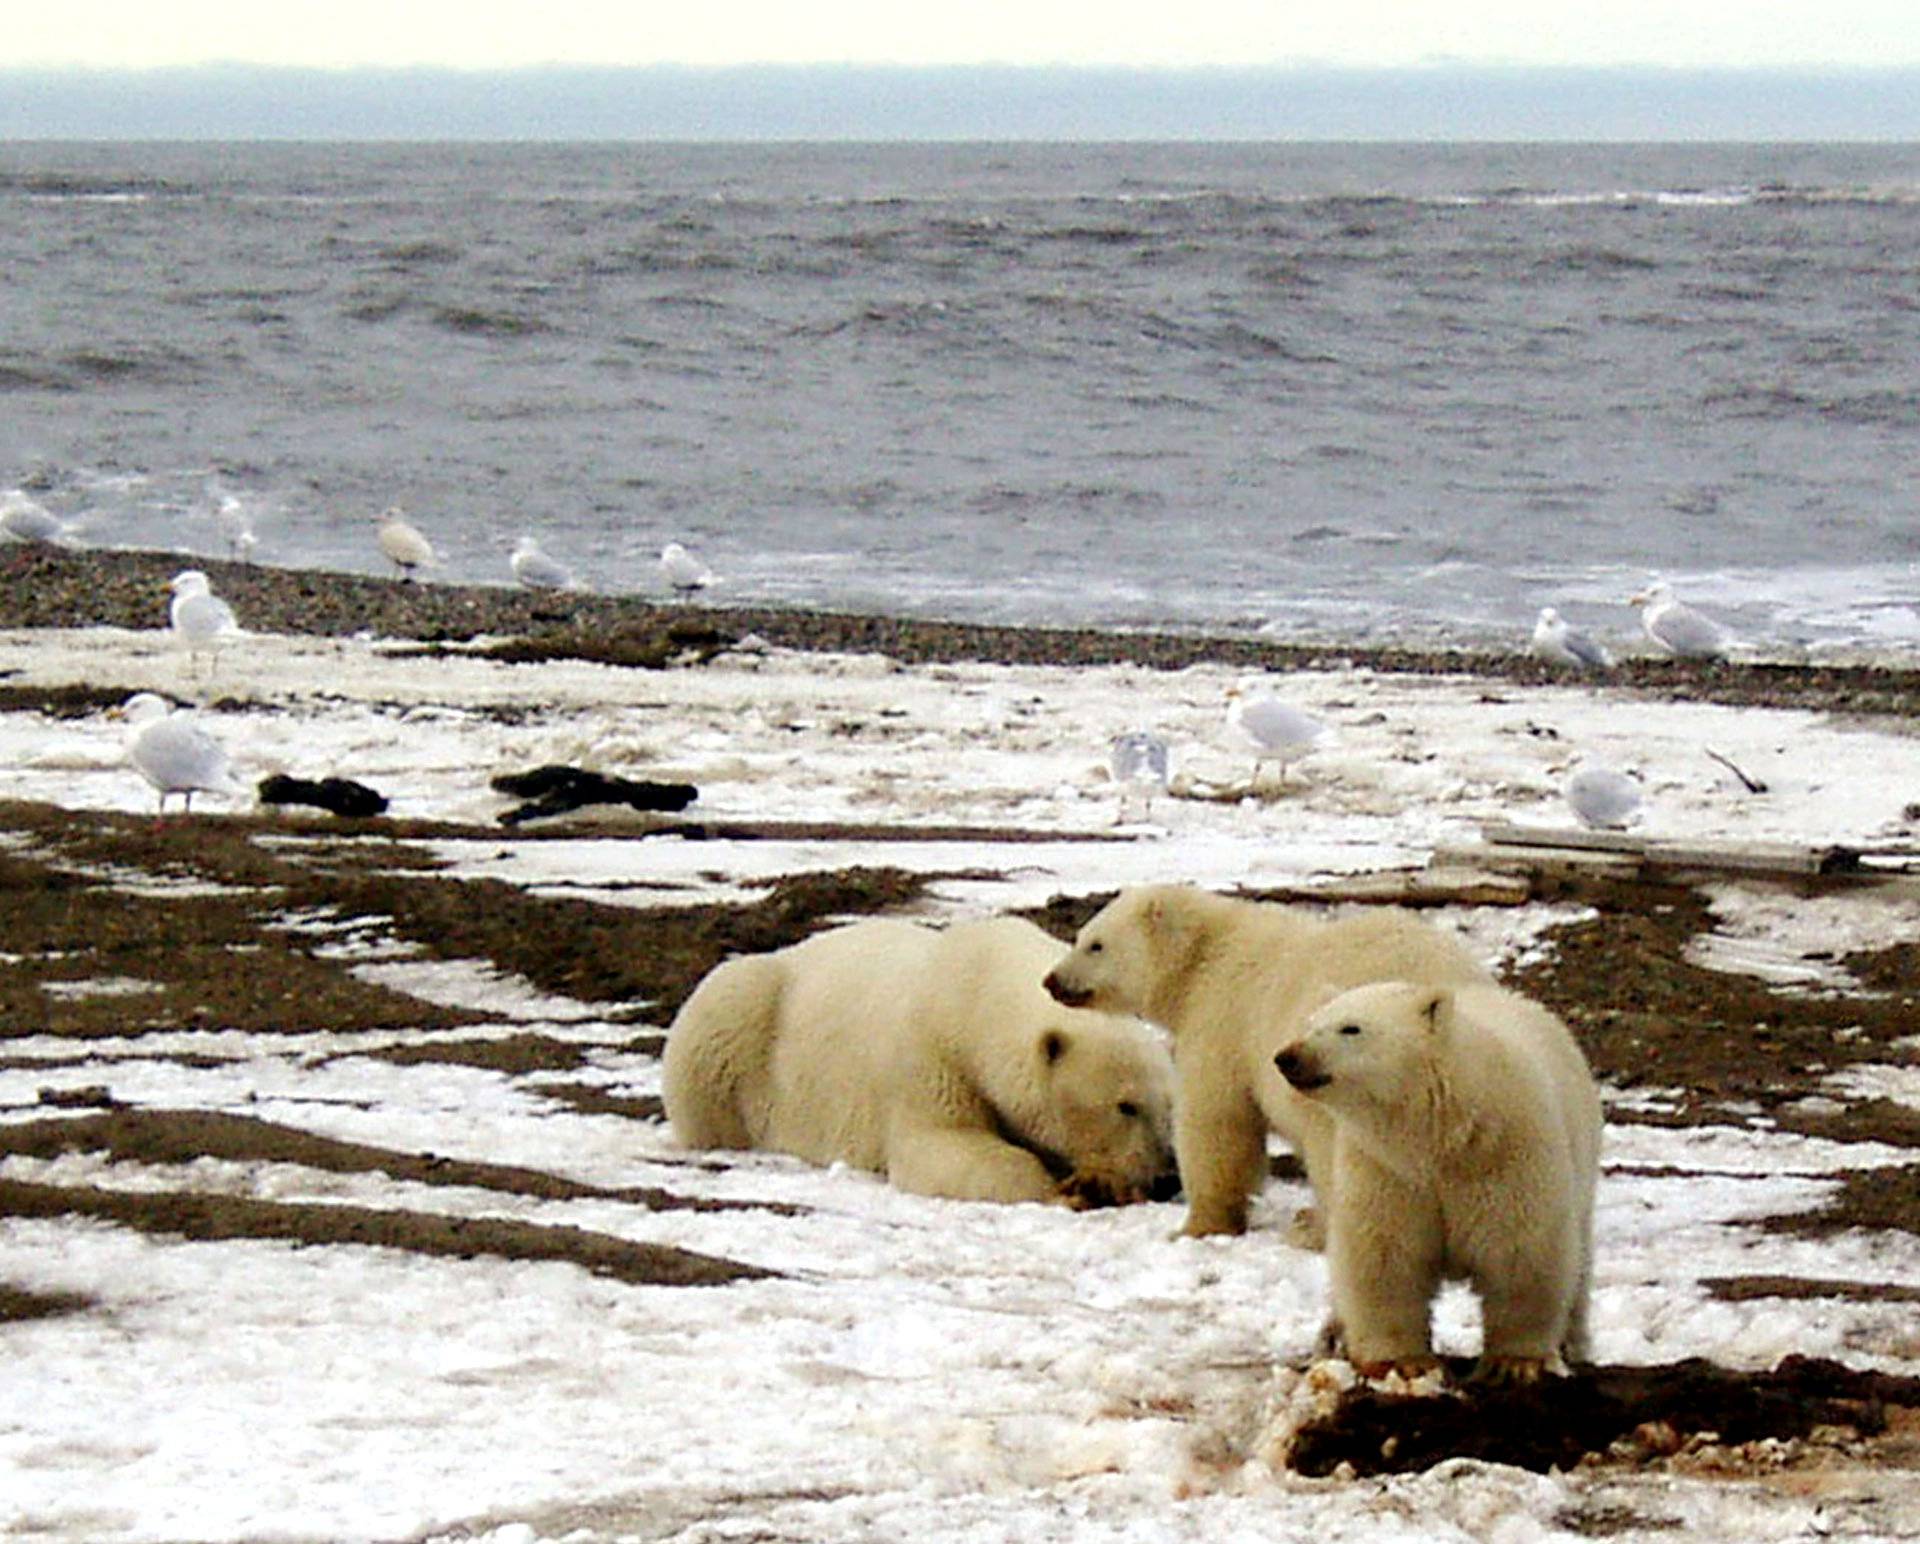 File picture of polar bears within the 1002 Area of the Arctic National Wildlife Refuge